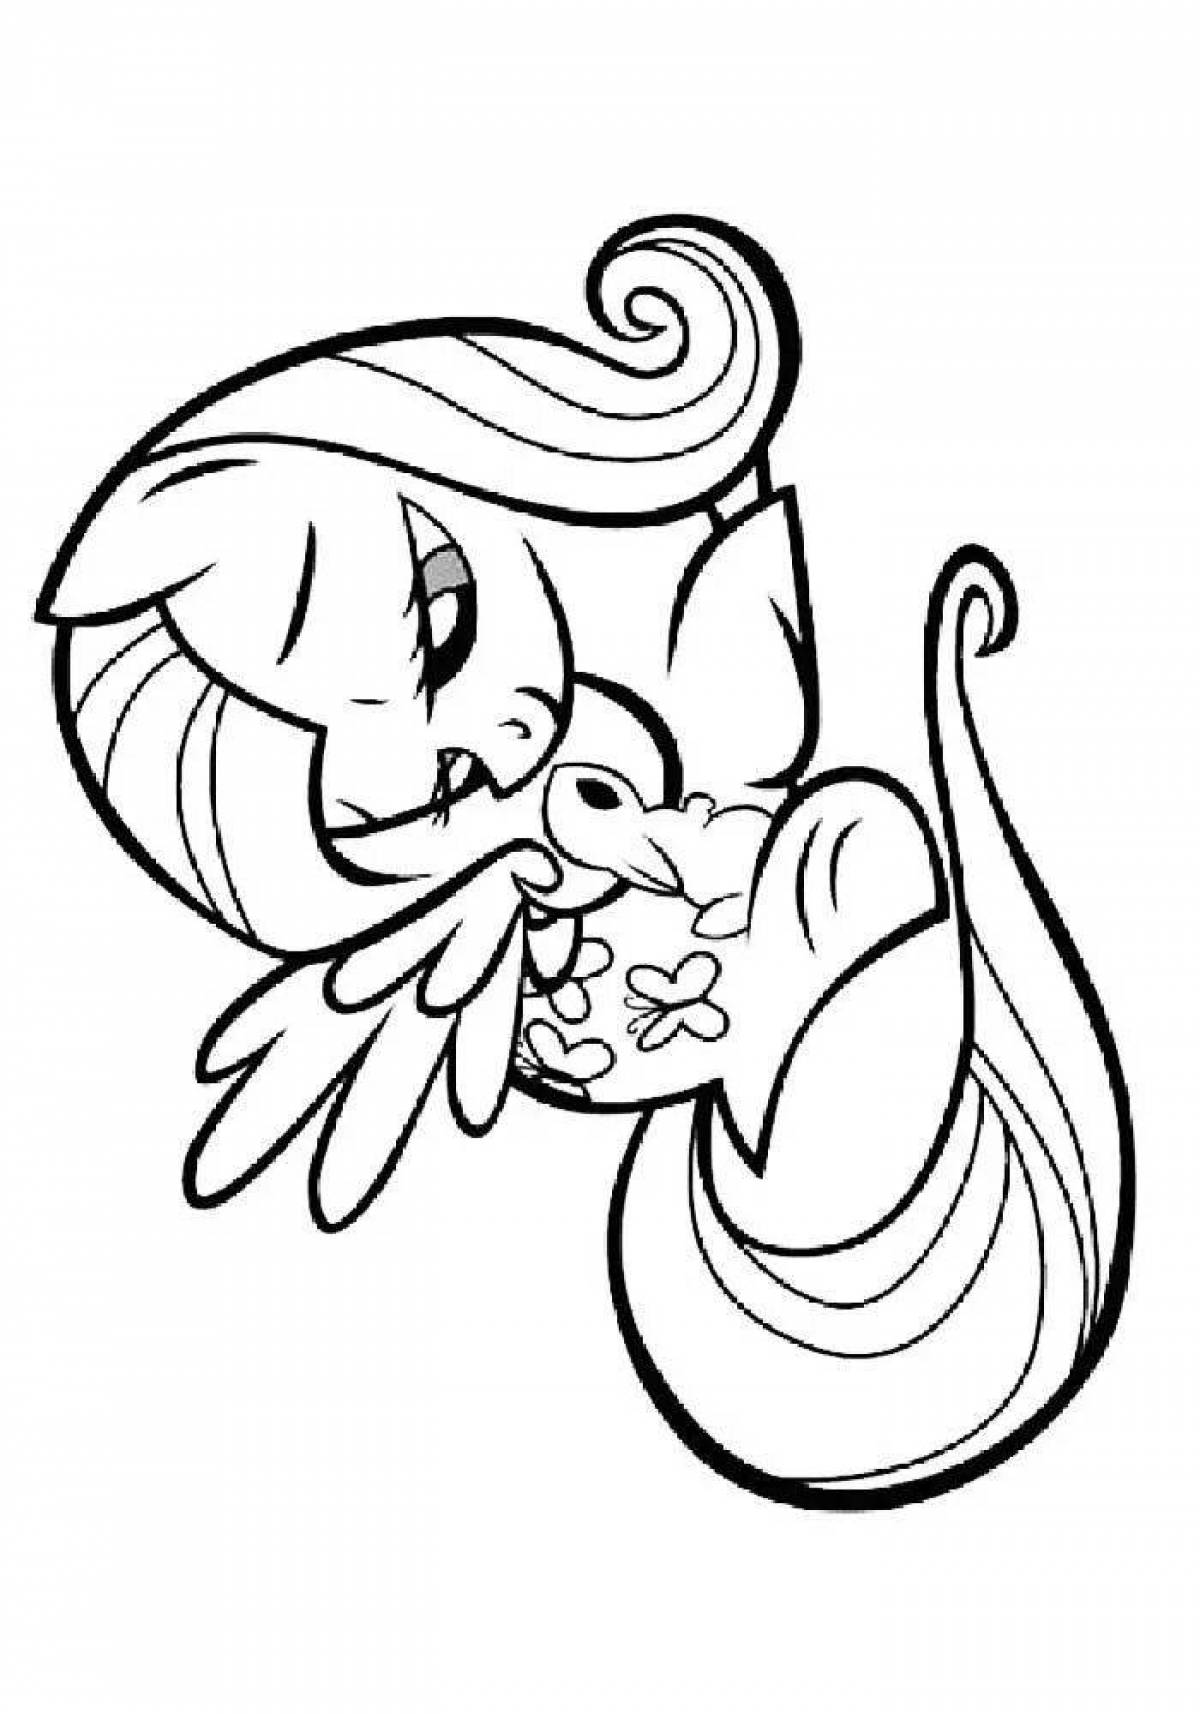 Sparkly Fluttershy pony my little coloring book